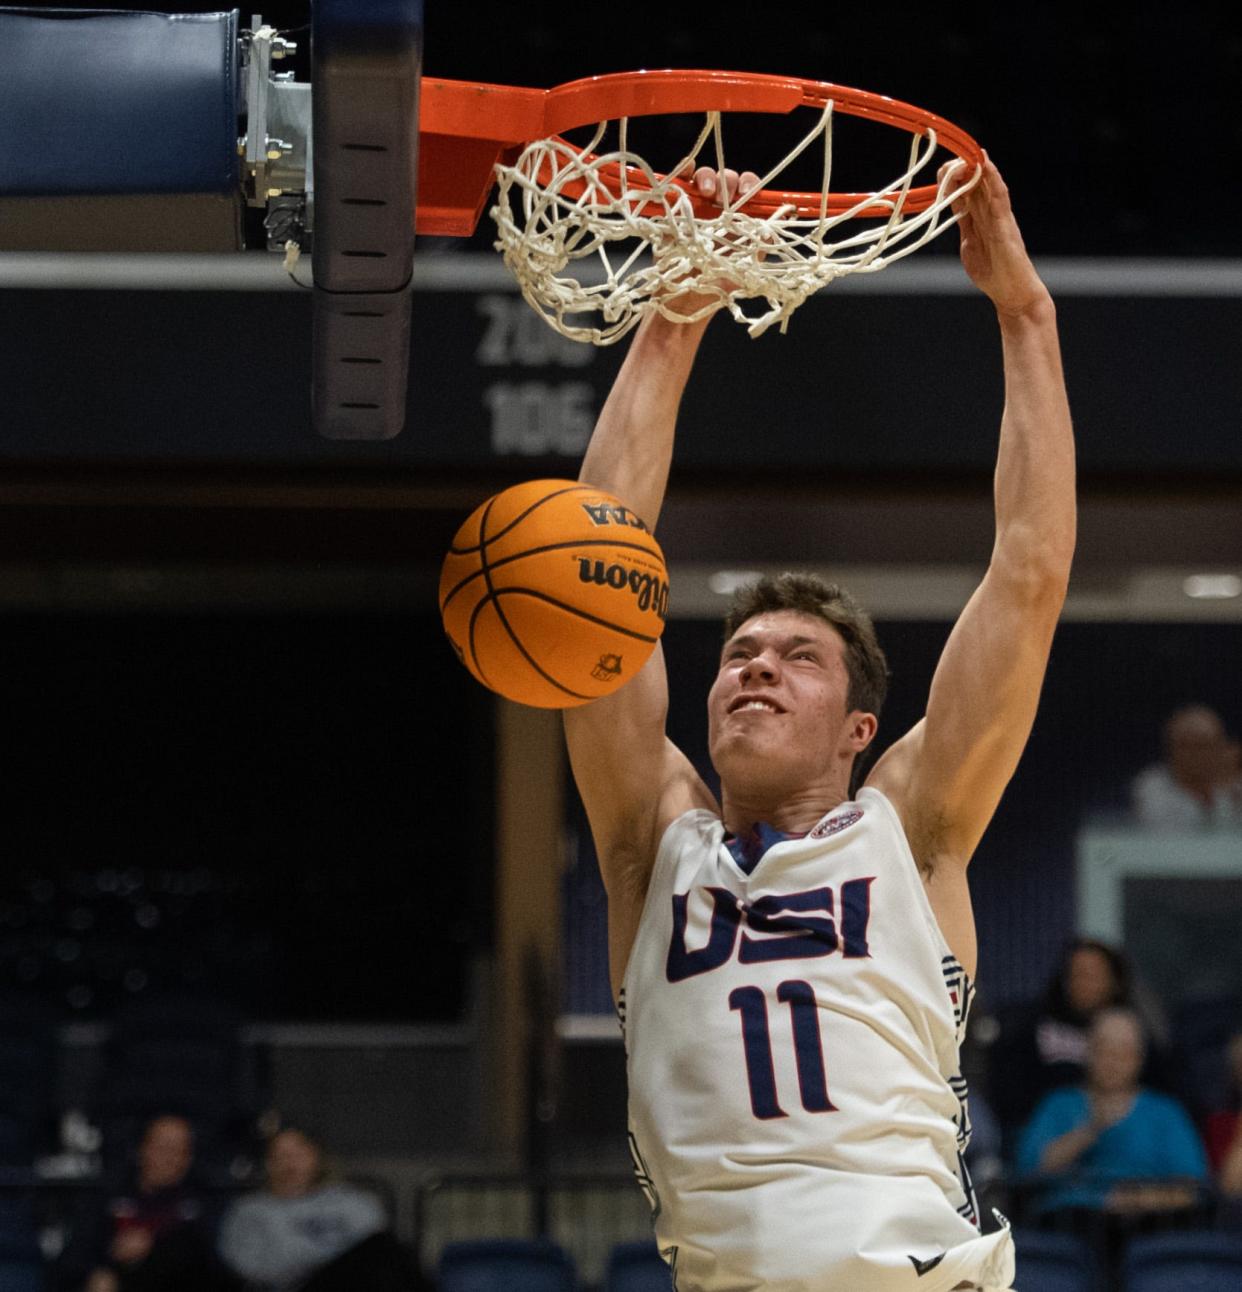 USI’s Jack Mielke (11) dunks the ball during the USI Midnight Madness event at Screaming Eagles Arena in Evansville, Ind., Thursday evening, Oct. 20, 2022. 